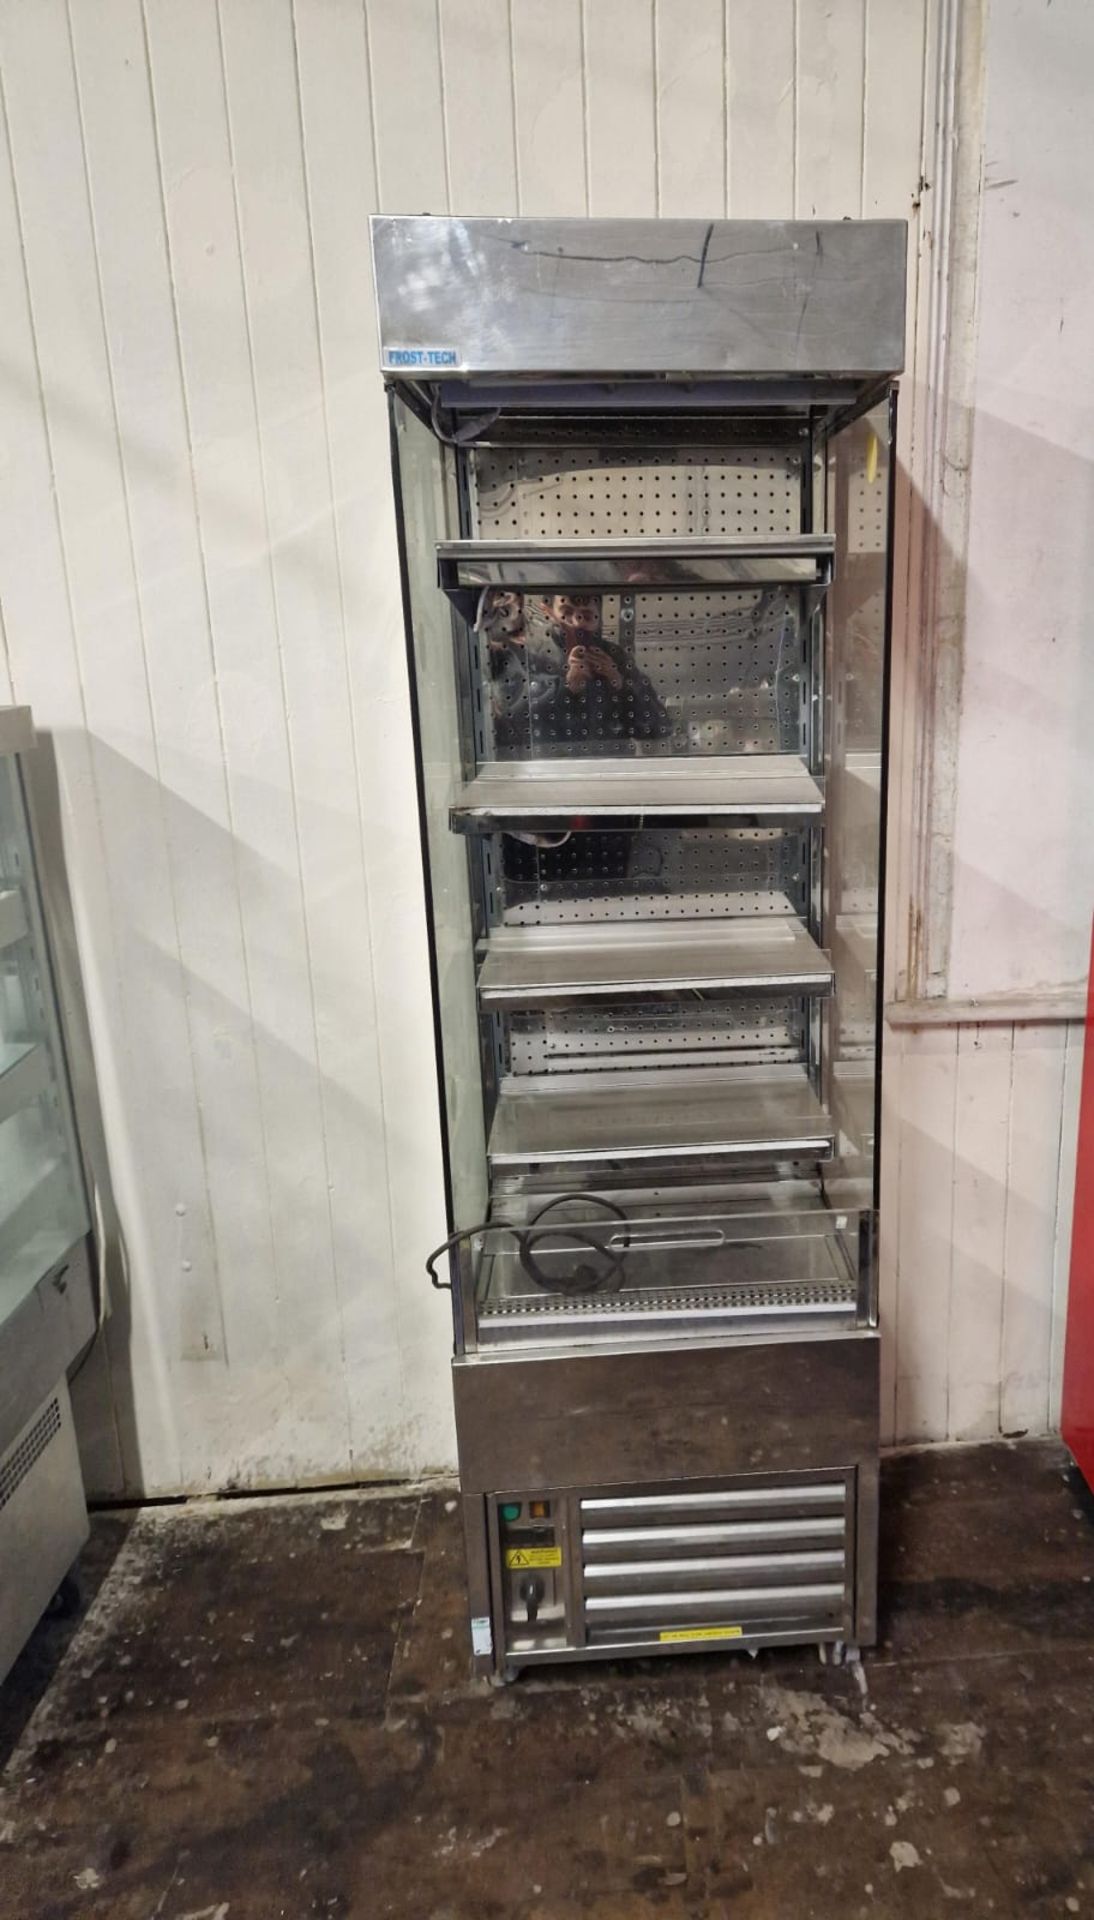 FROSTTECK MULTIDECK 600 W FRIDGE - FULLY WORKING AND SERVICED  